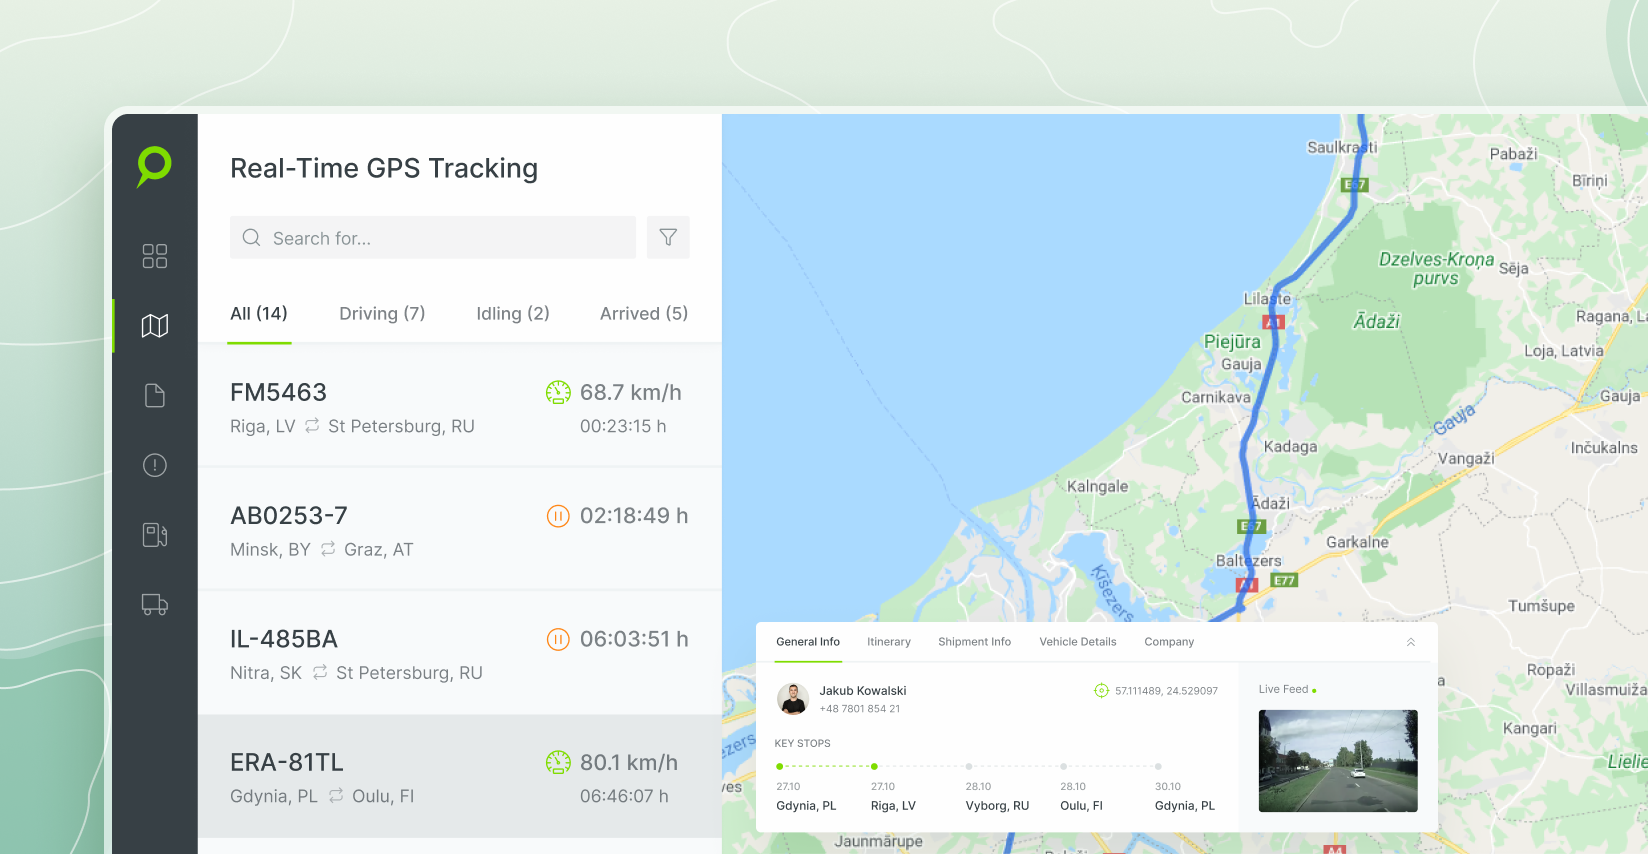 Fleet Management and Tracking Features for Logistics